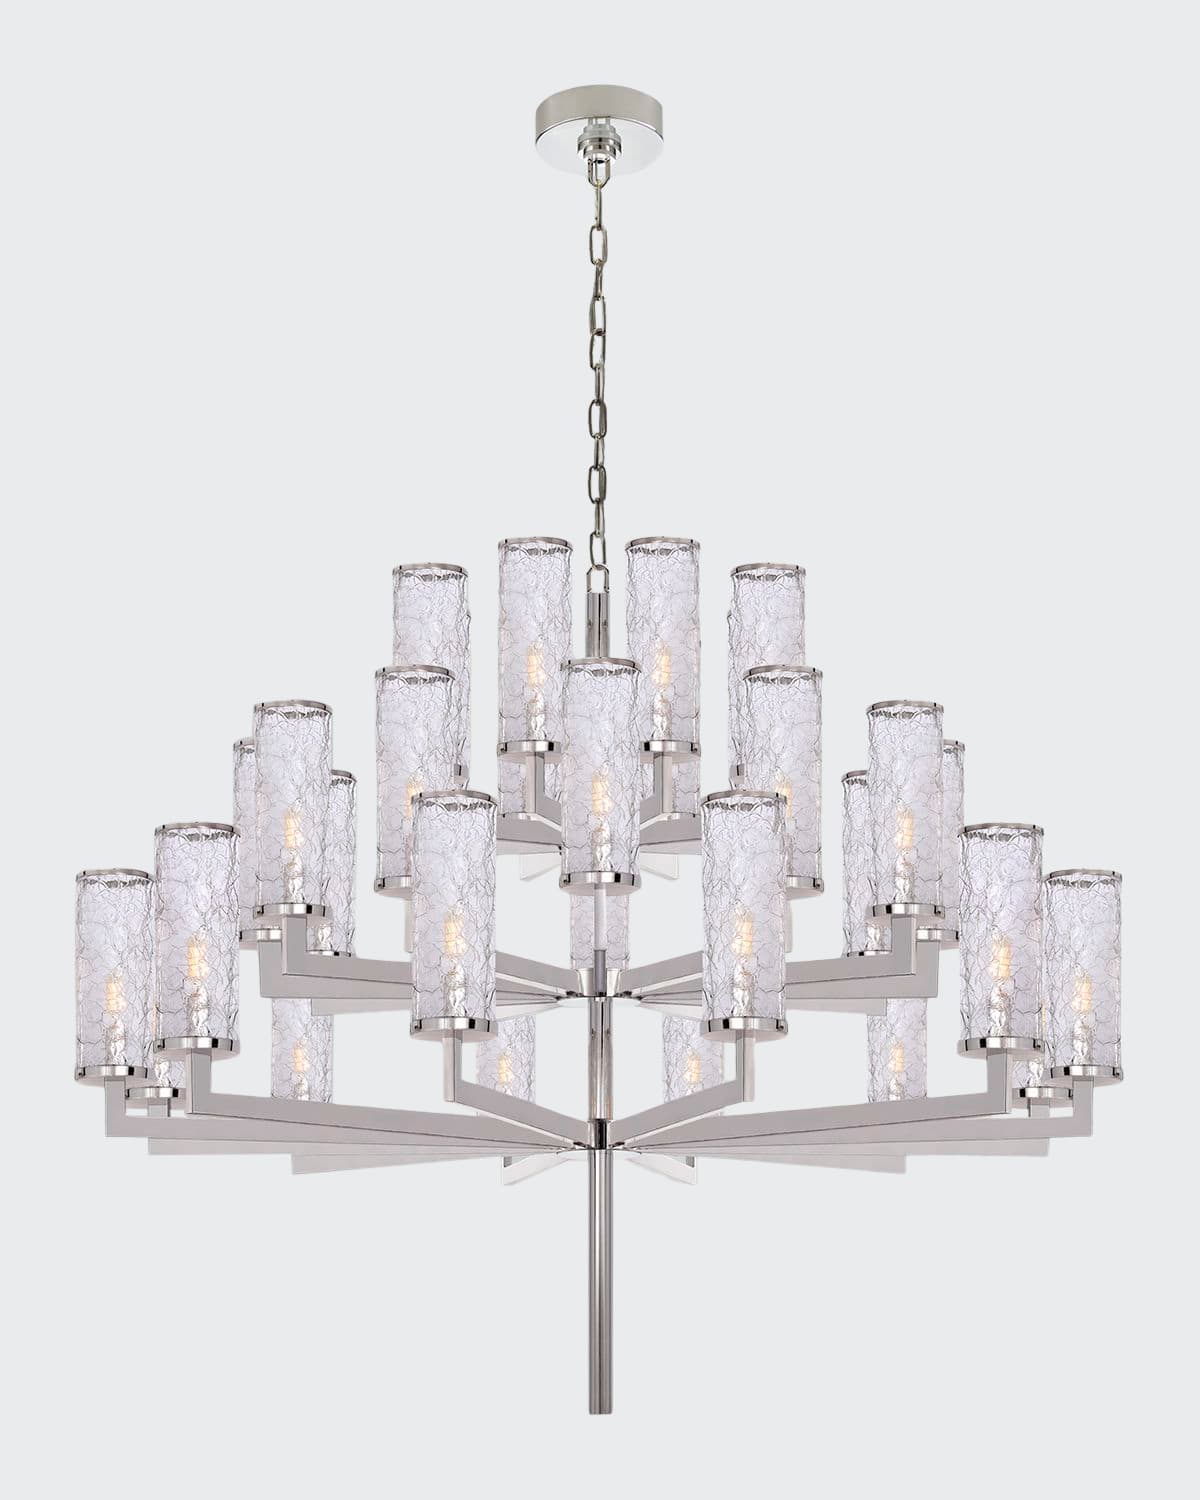 Kelly Wearstler For Visual Comfort Signature Liaison Triple Tier Chandelier In Polished Nickel